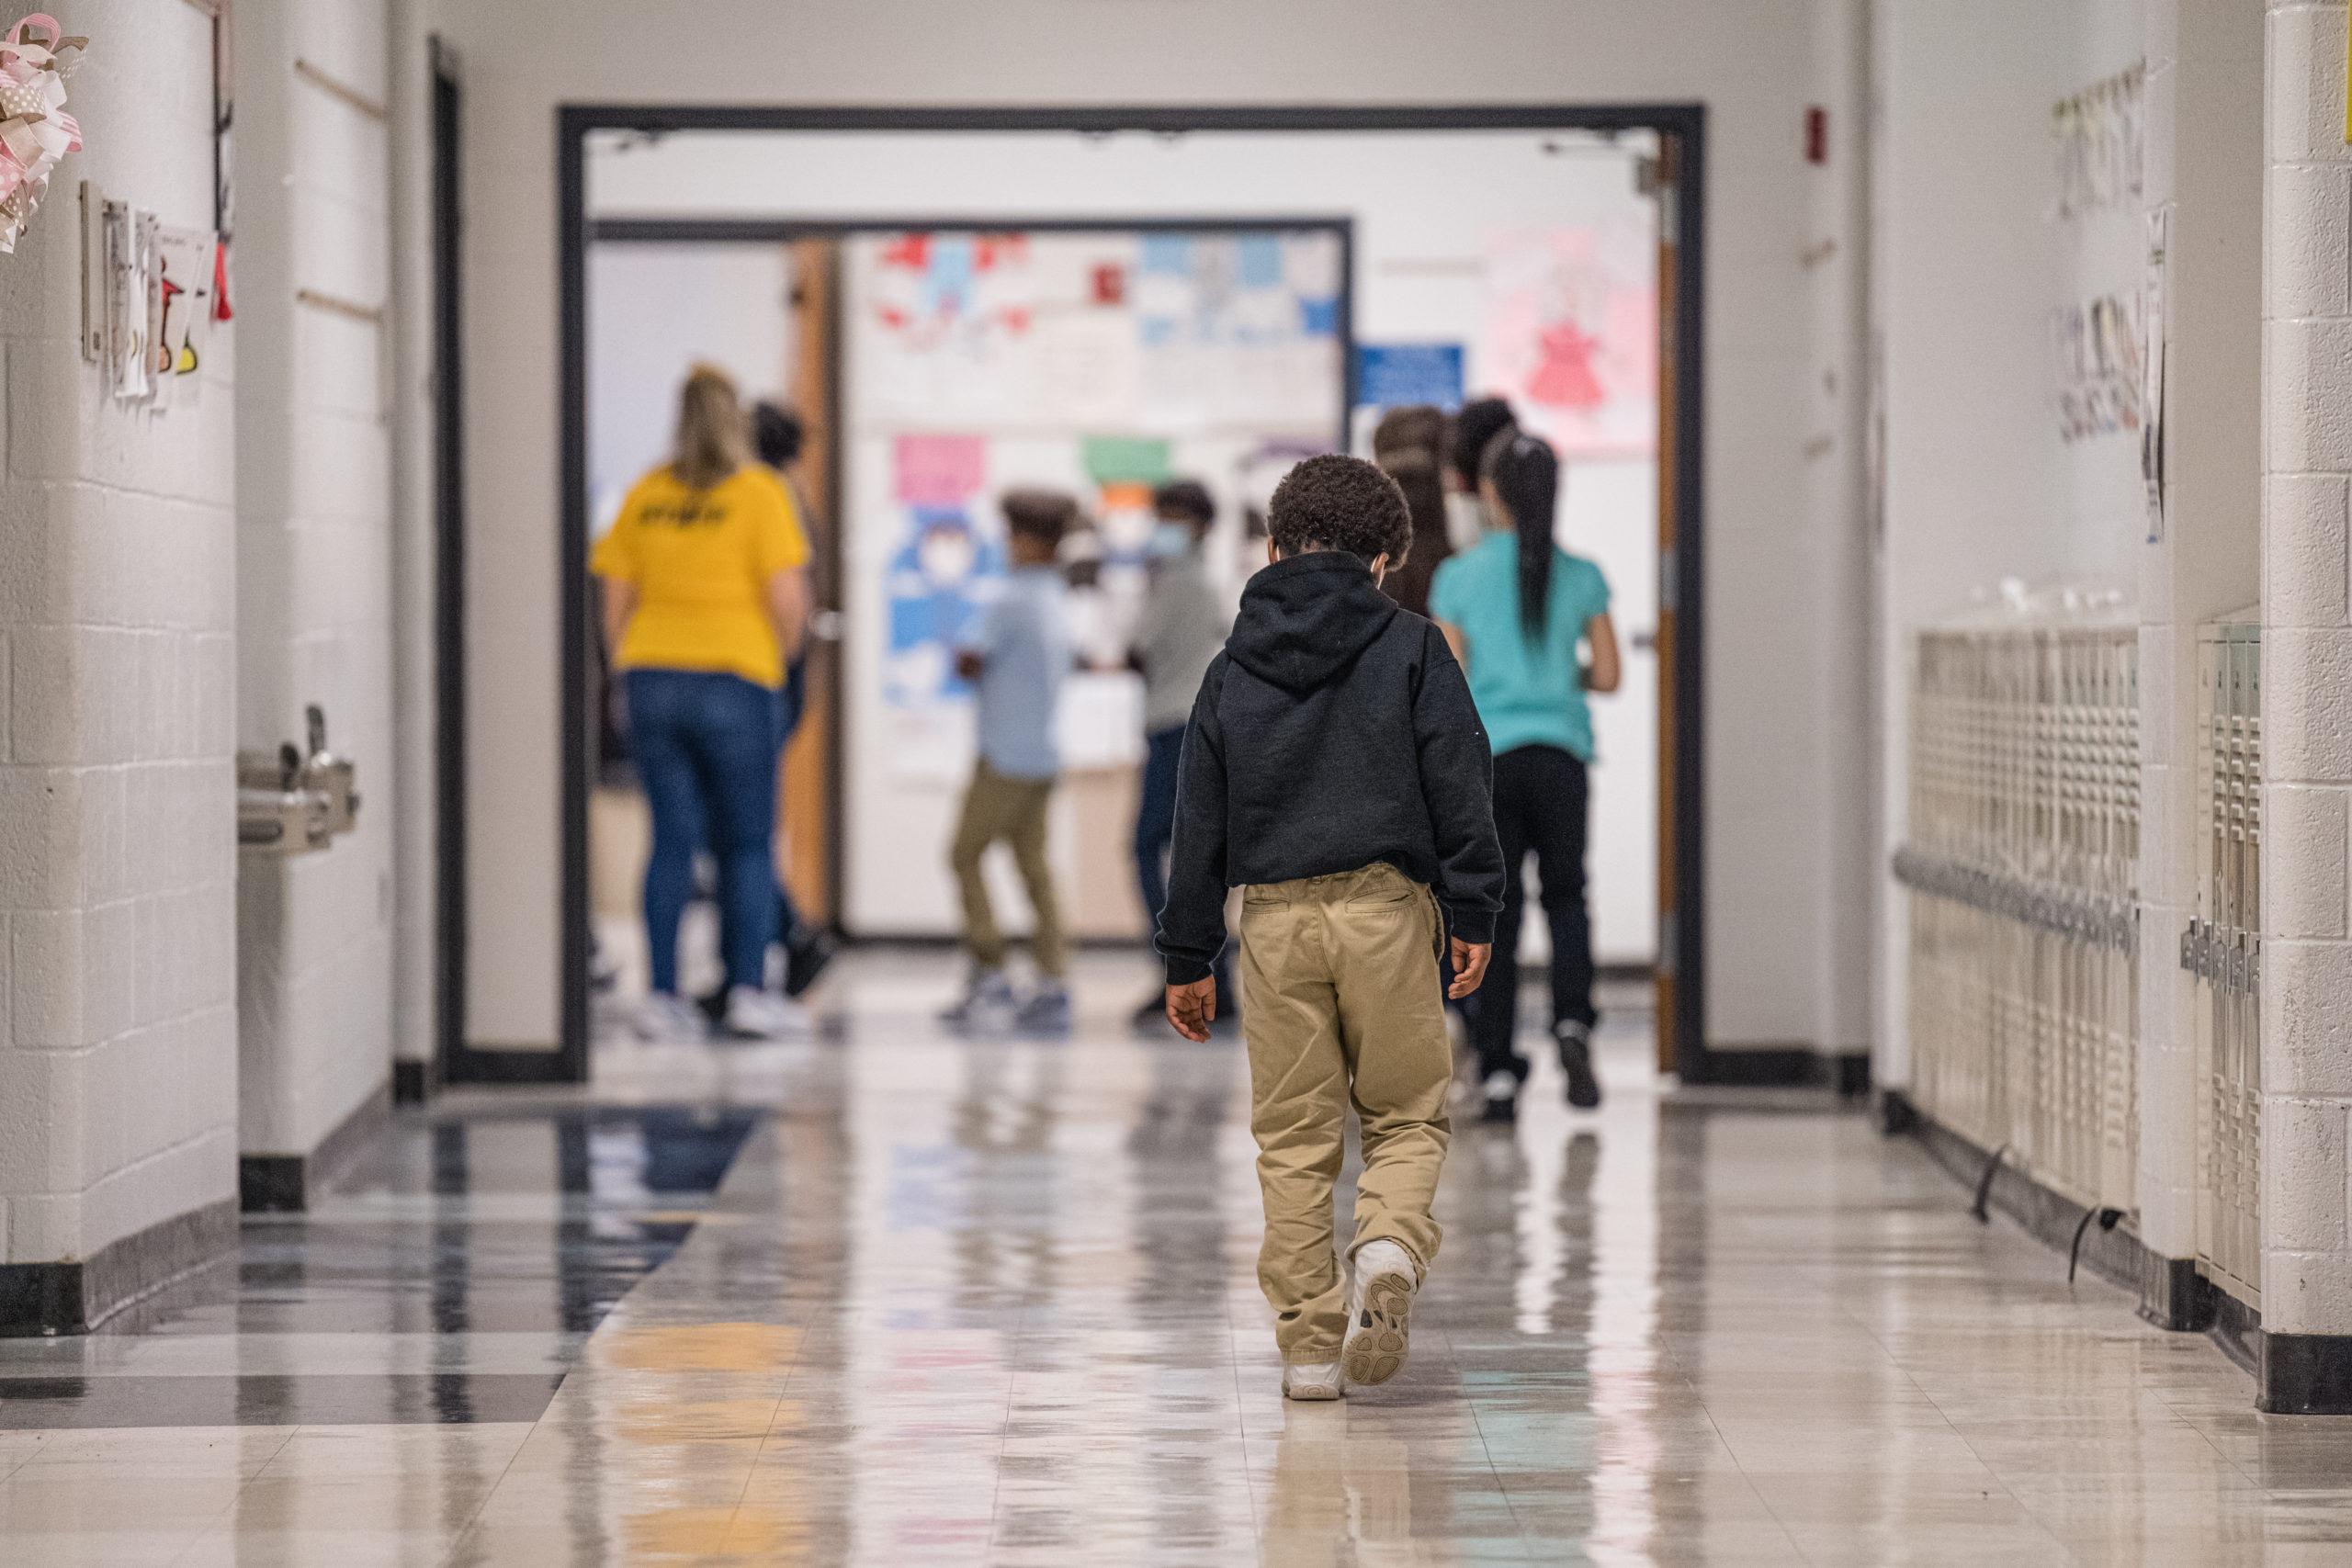 A young boy walks down a hallway at Carter Traditional Elementary School on January 24, 2022 in Louisville, Kentucky. Students in the district are returning to in-person class after two weeks of Non-Traditional Instruction (NTI) due to staffing issues caused by a surge of the COVID-19 omicron variant. (Photo by Jon Cherry/Getty Images)